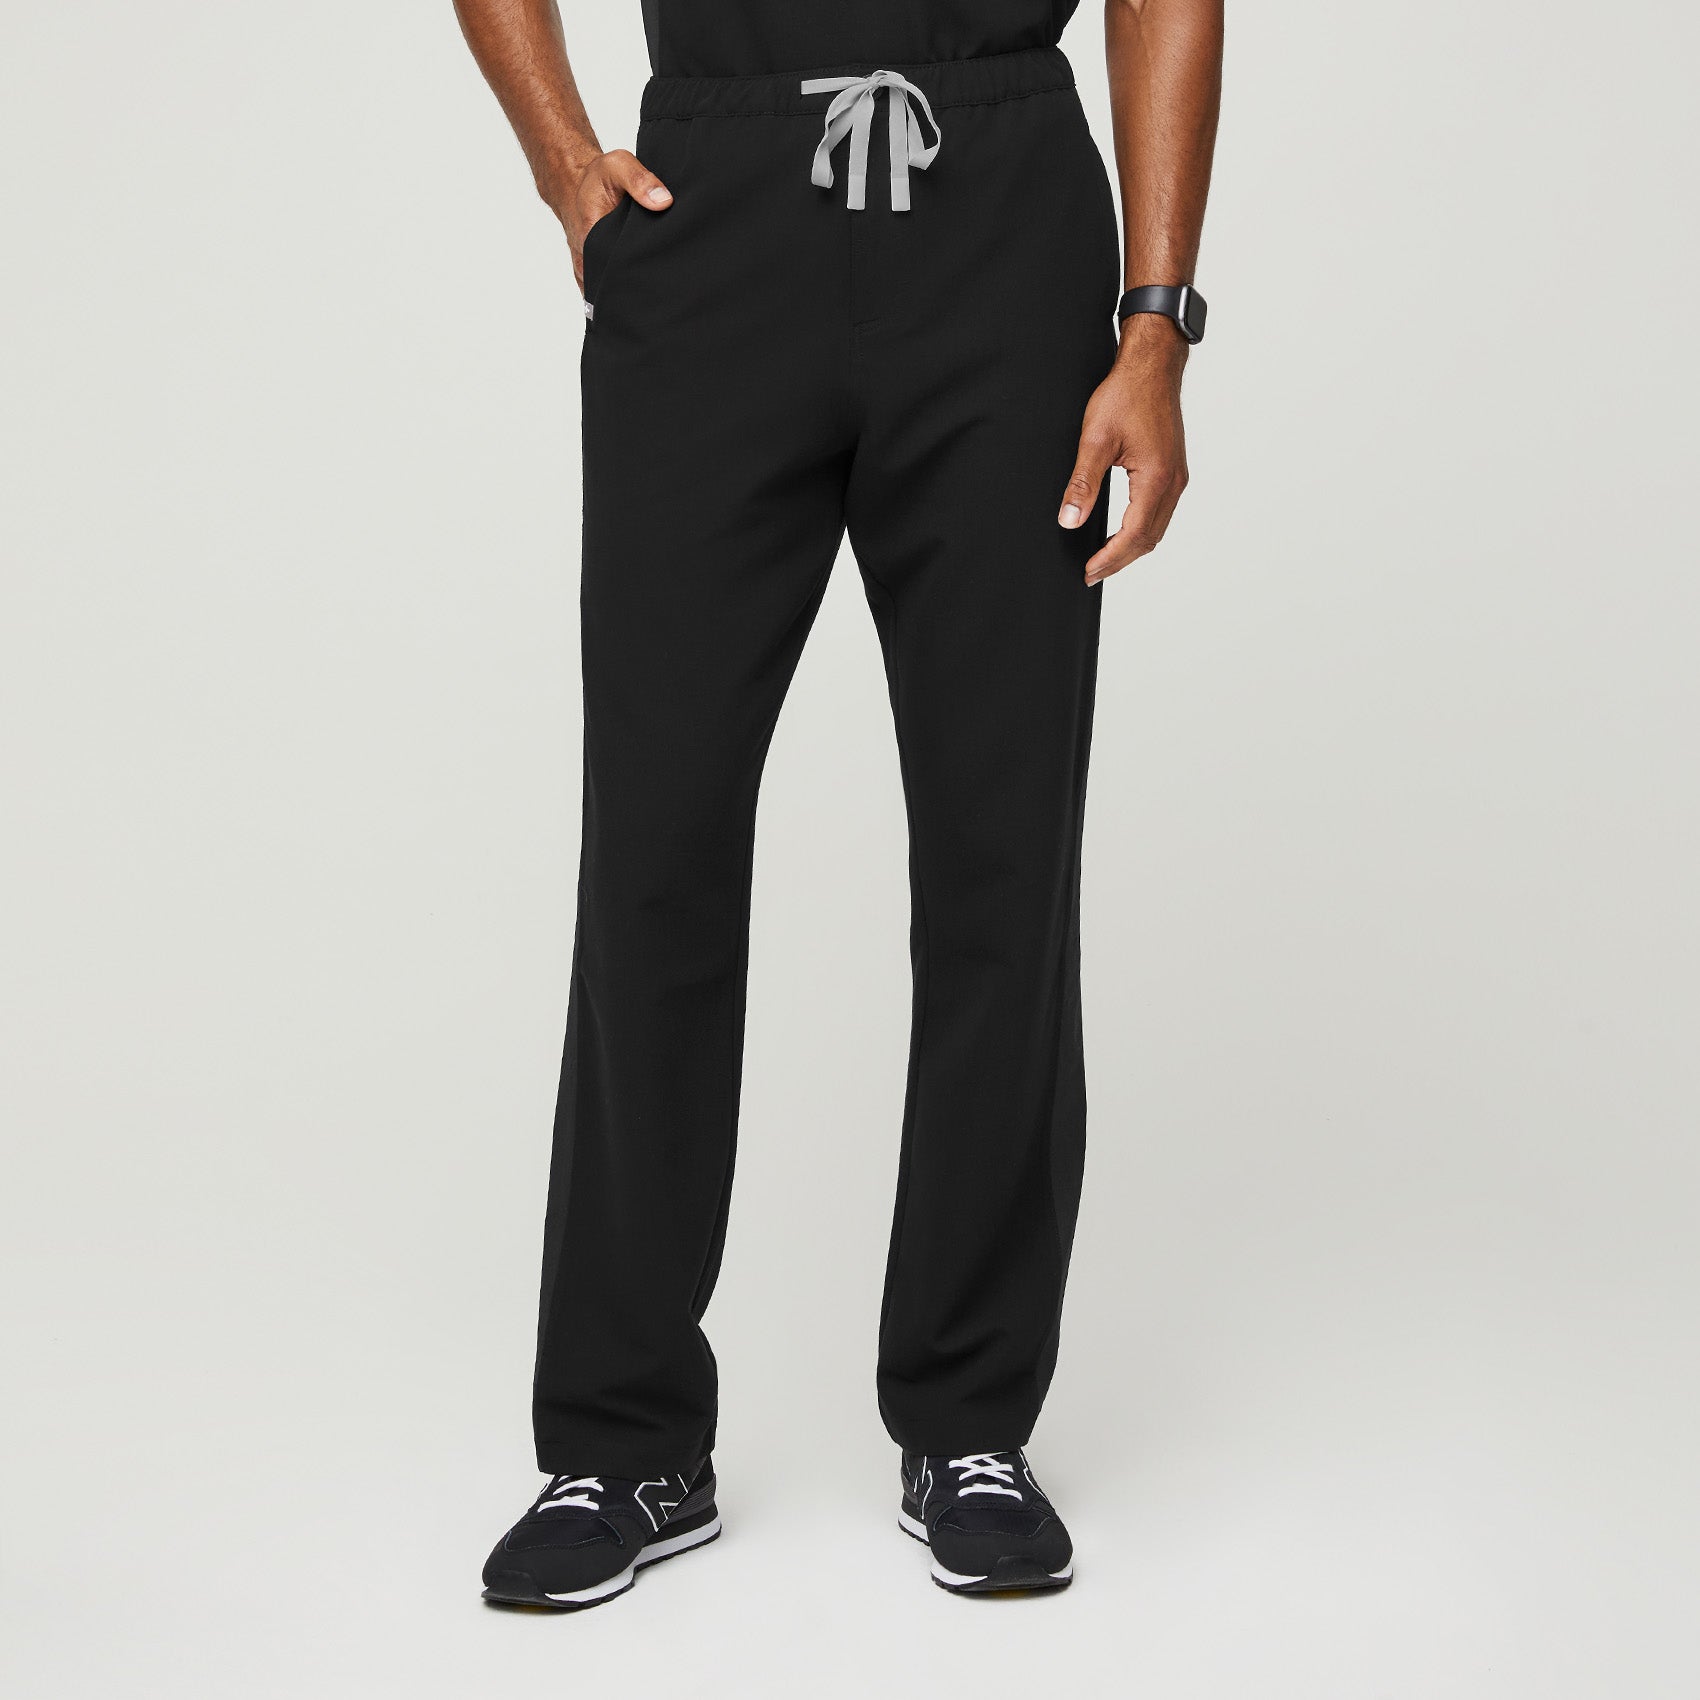 Swadesiblog.com - Best Jockey Track Pants For Men-Reviews & Buyers Guide  Jockey Track Pants are the most comfortable and informal types of bottom  wear that can be worn anywhere and at any